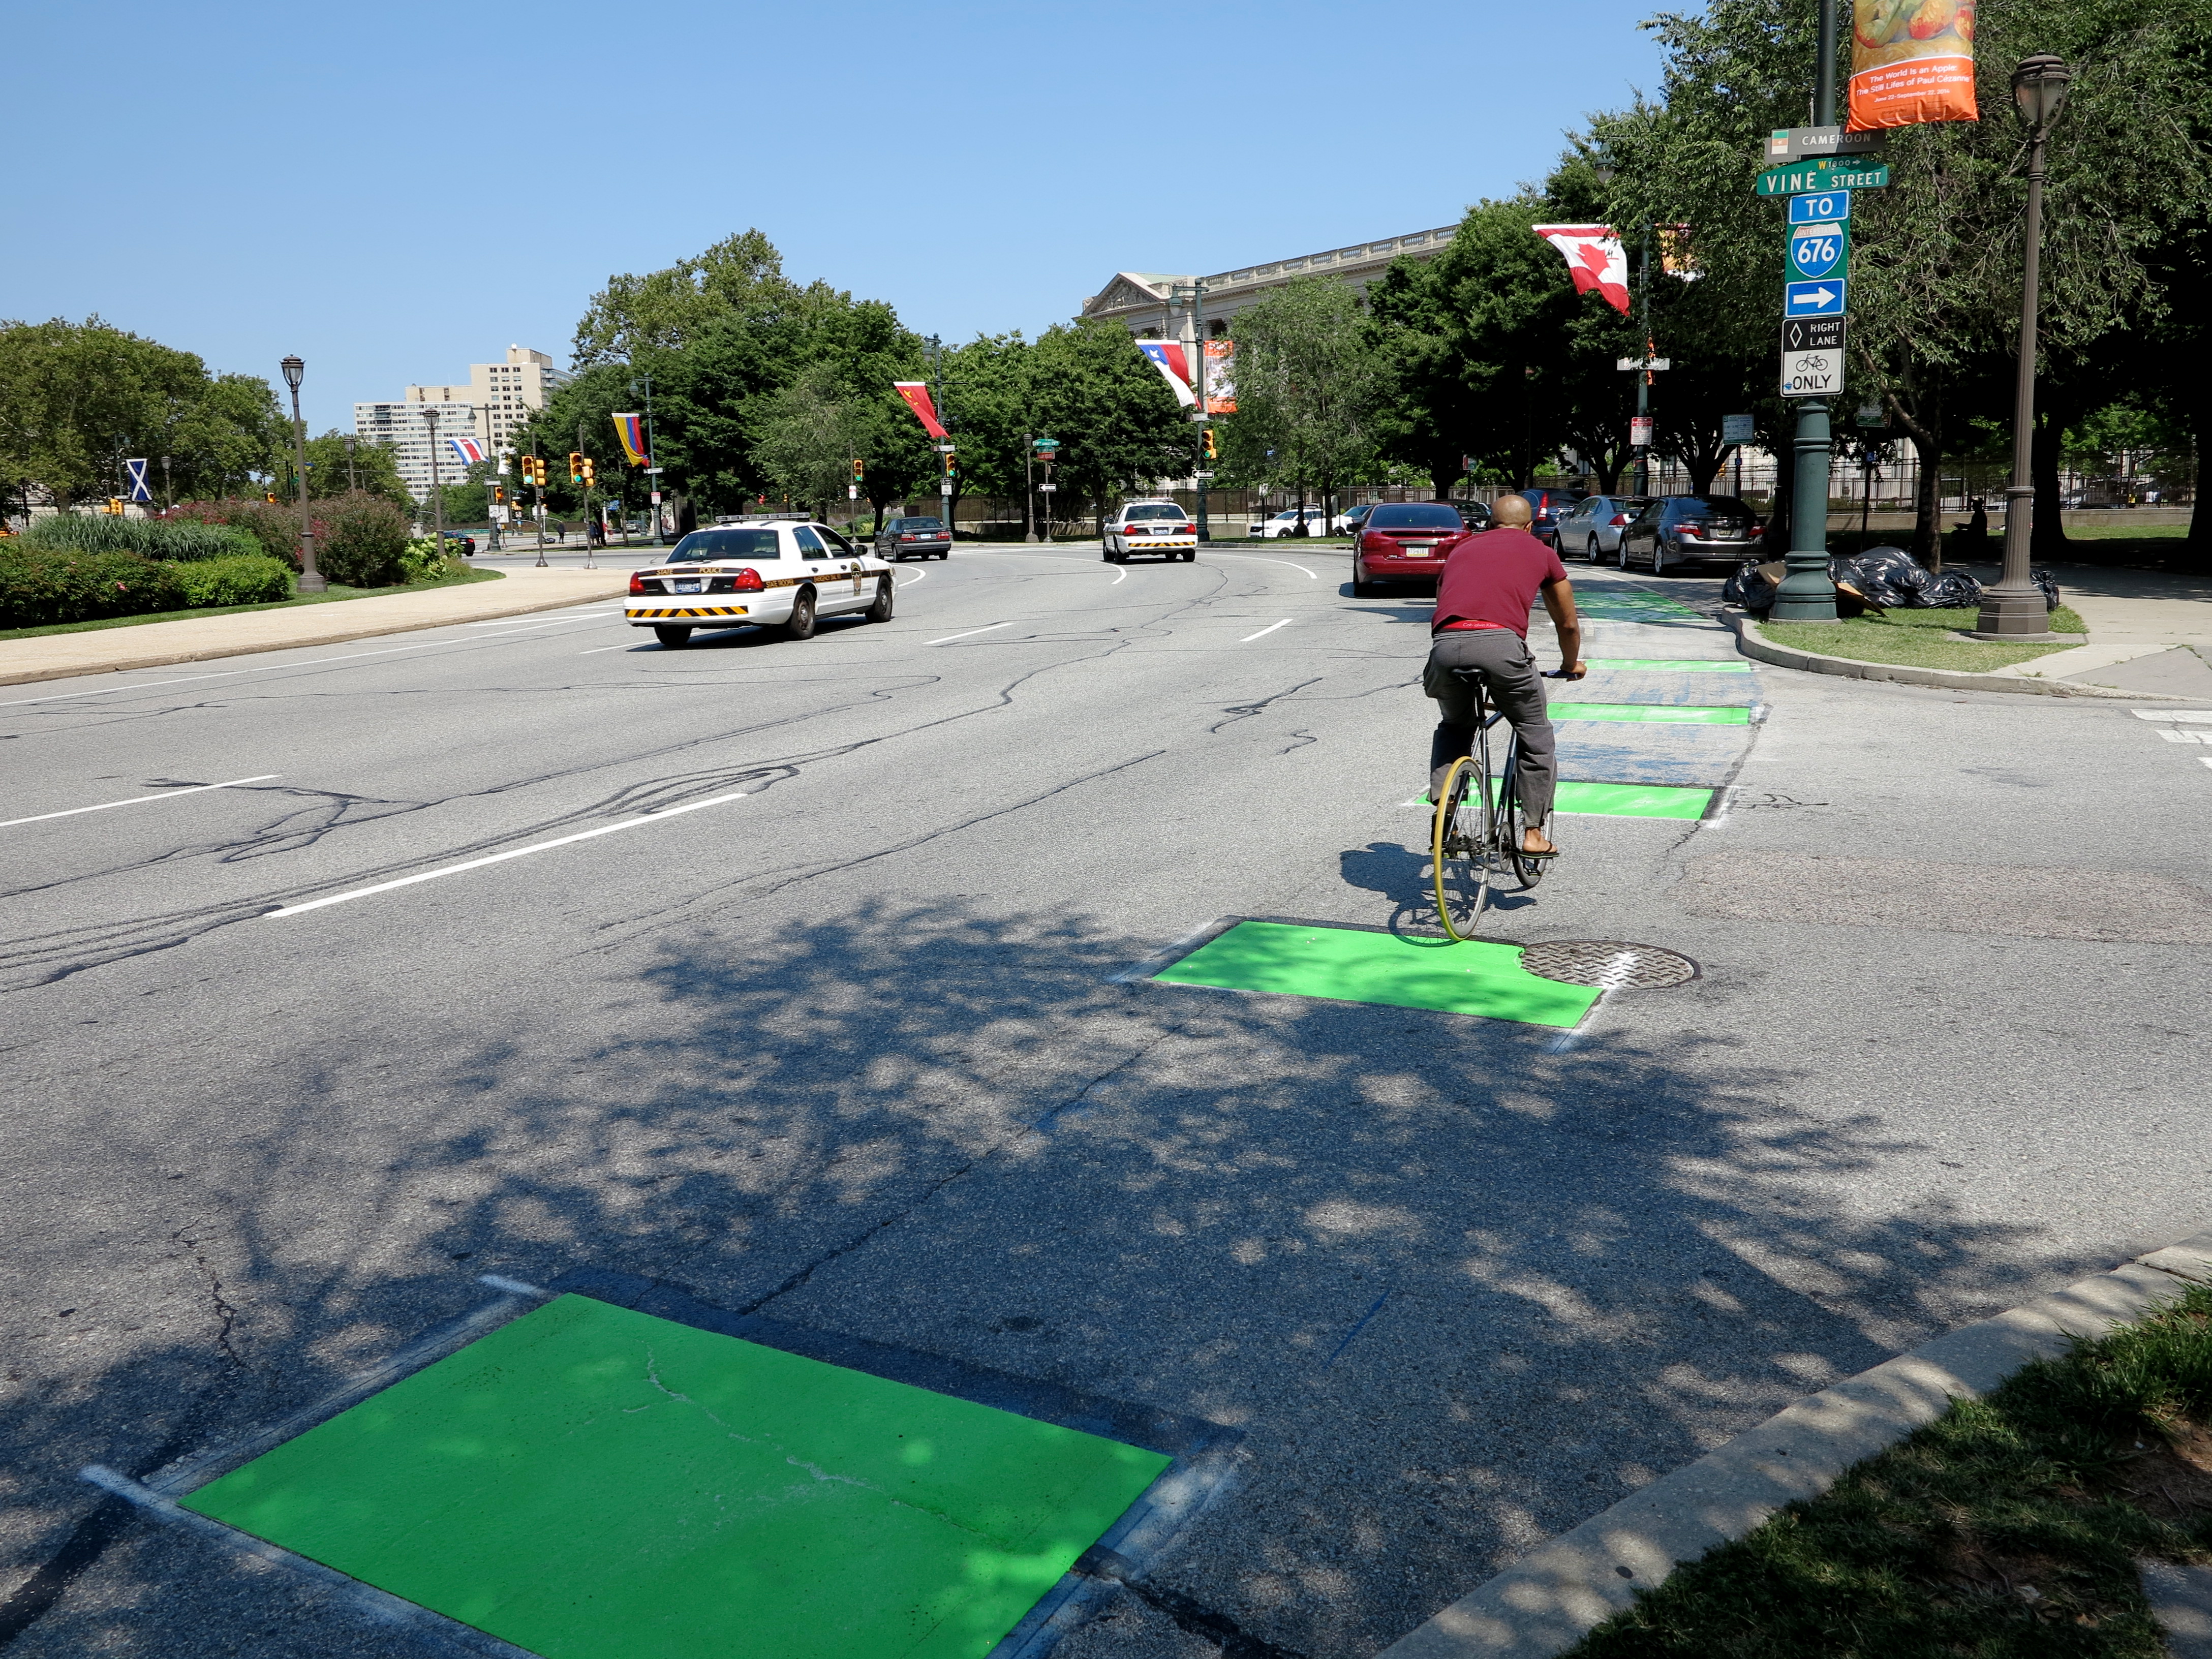 Fresh green paint for a bike/car conflict zone on Logan Circle